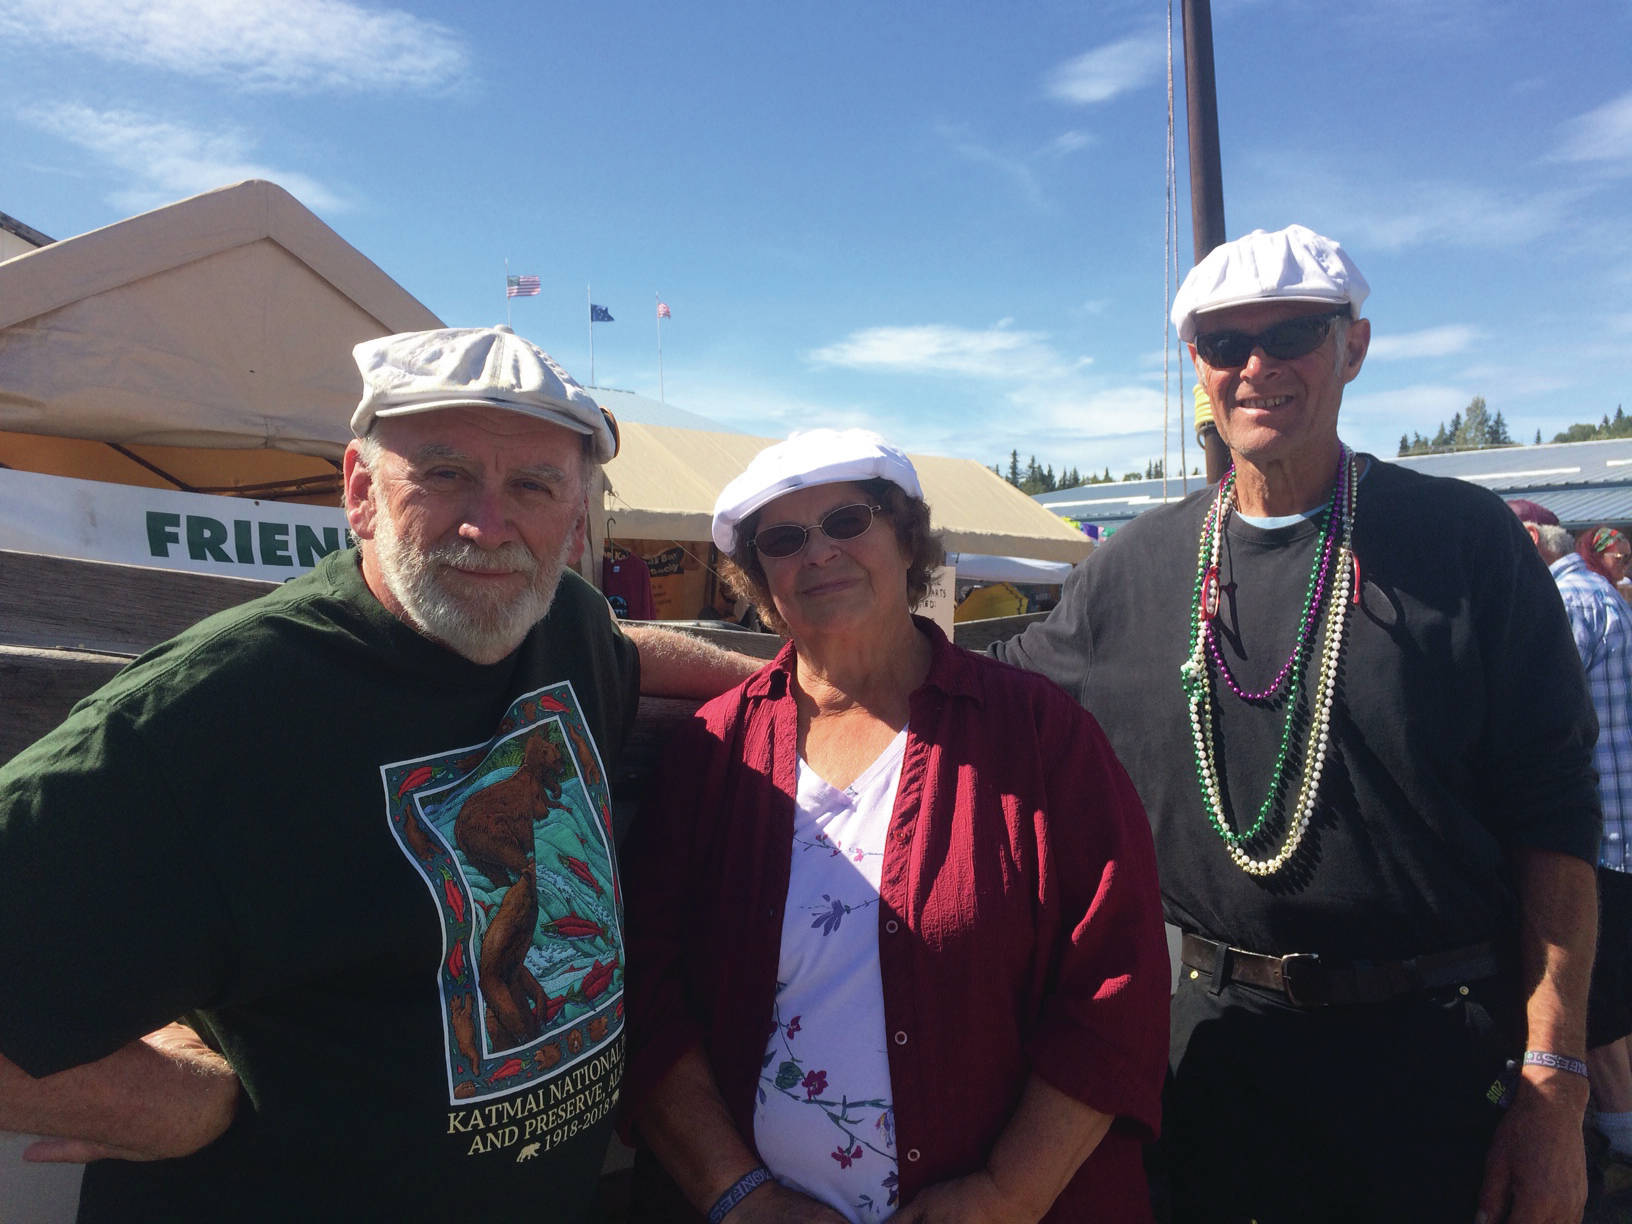 From left, Tim Troll, Kate Mitchell and Dave Seaman stand in front of LML 144 on Sunday, Aug. 4, 2019, at Salmonfest in Ninilchik, Alaska. They are organizing “Sailing Back to the Bay 2020,” which will take the one-time fishing vessel from Homer to Bristol Bay. (Photo by McKibben Jackinsky)